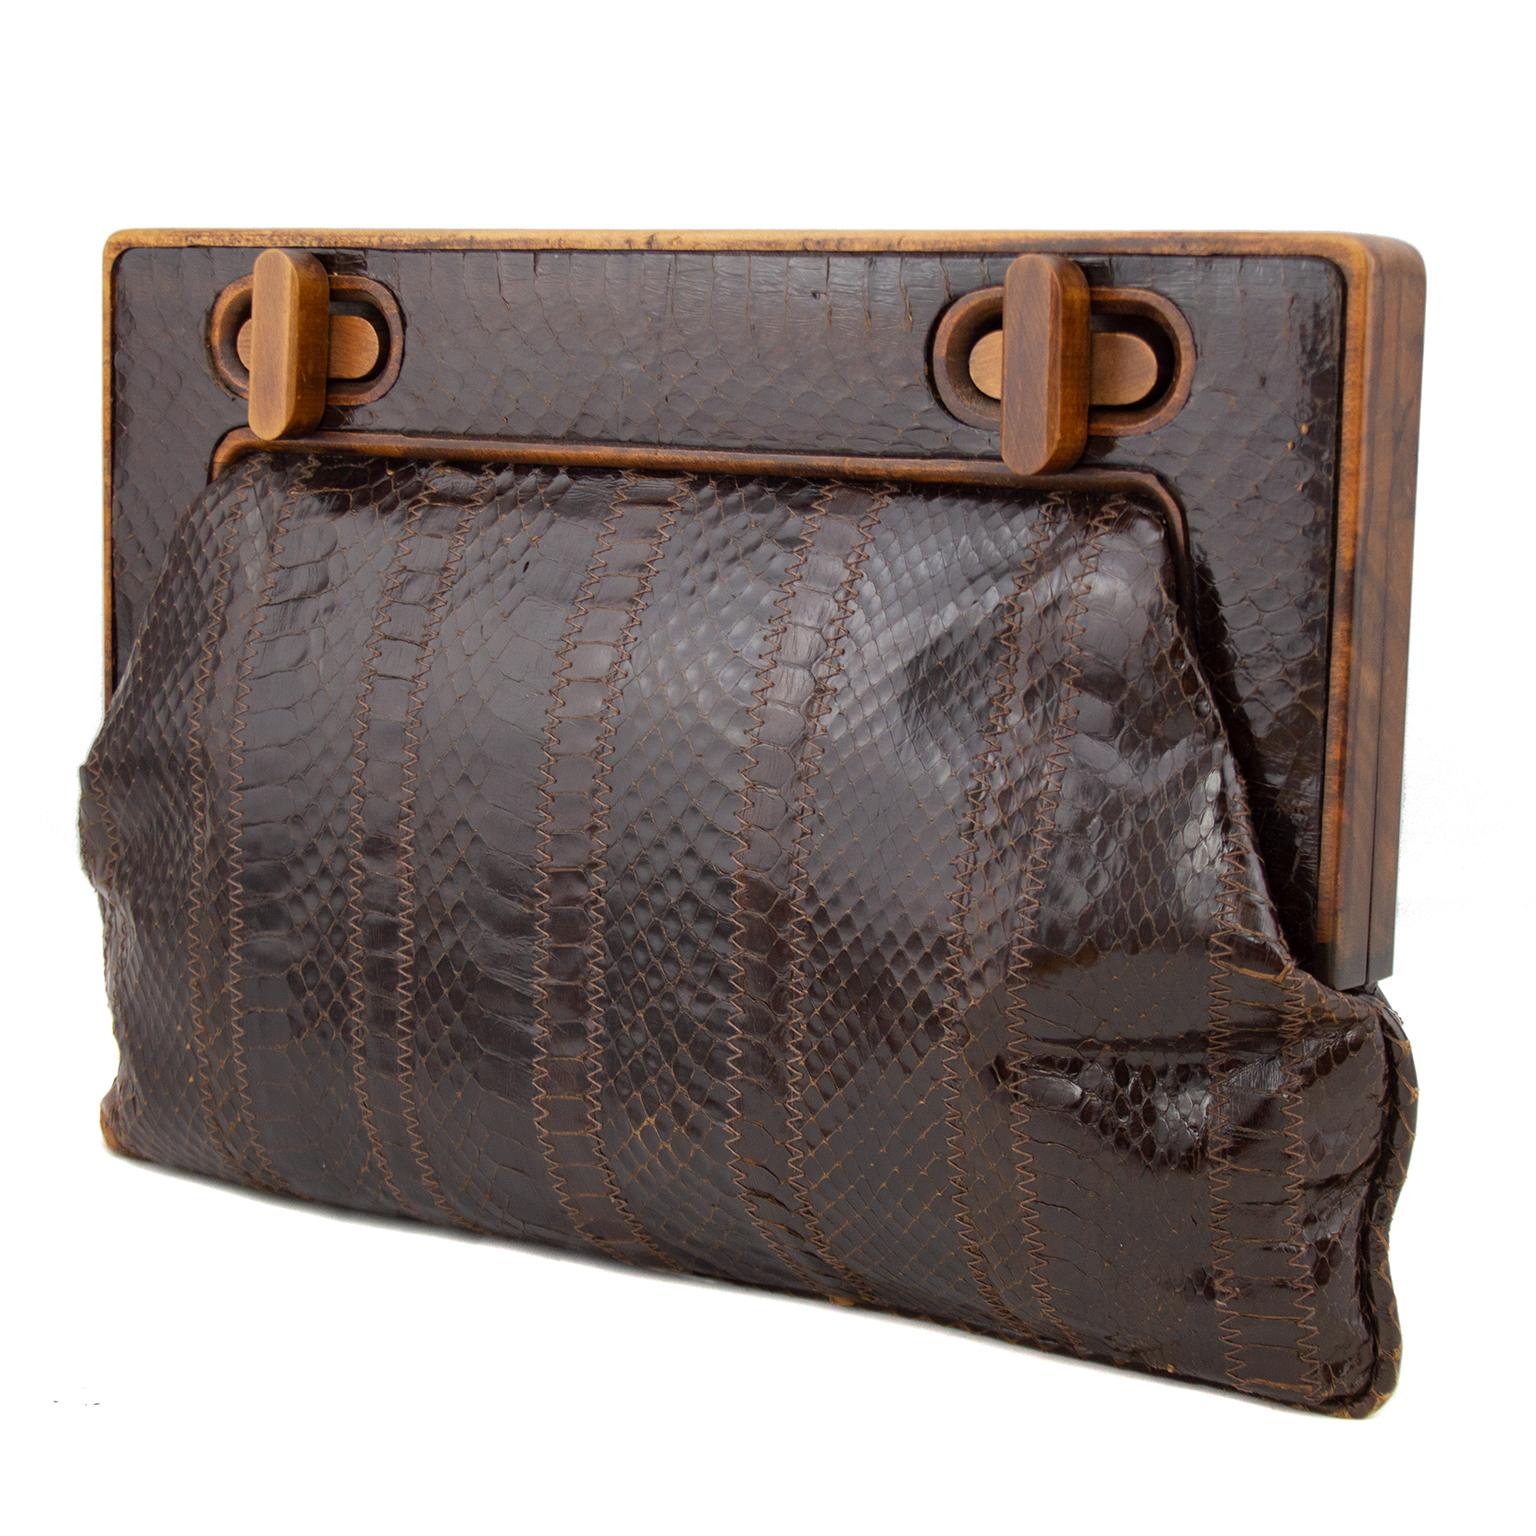 Super chic 1990s Bottega Veneta large rectangular clutch. Brown stamped reptile with thick wood frame. Two large twist locks on front of wood frame. Clean brown interior with single zippered slit pocket and gold brand plaque. Very good vintage